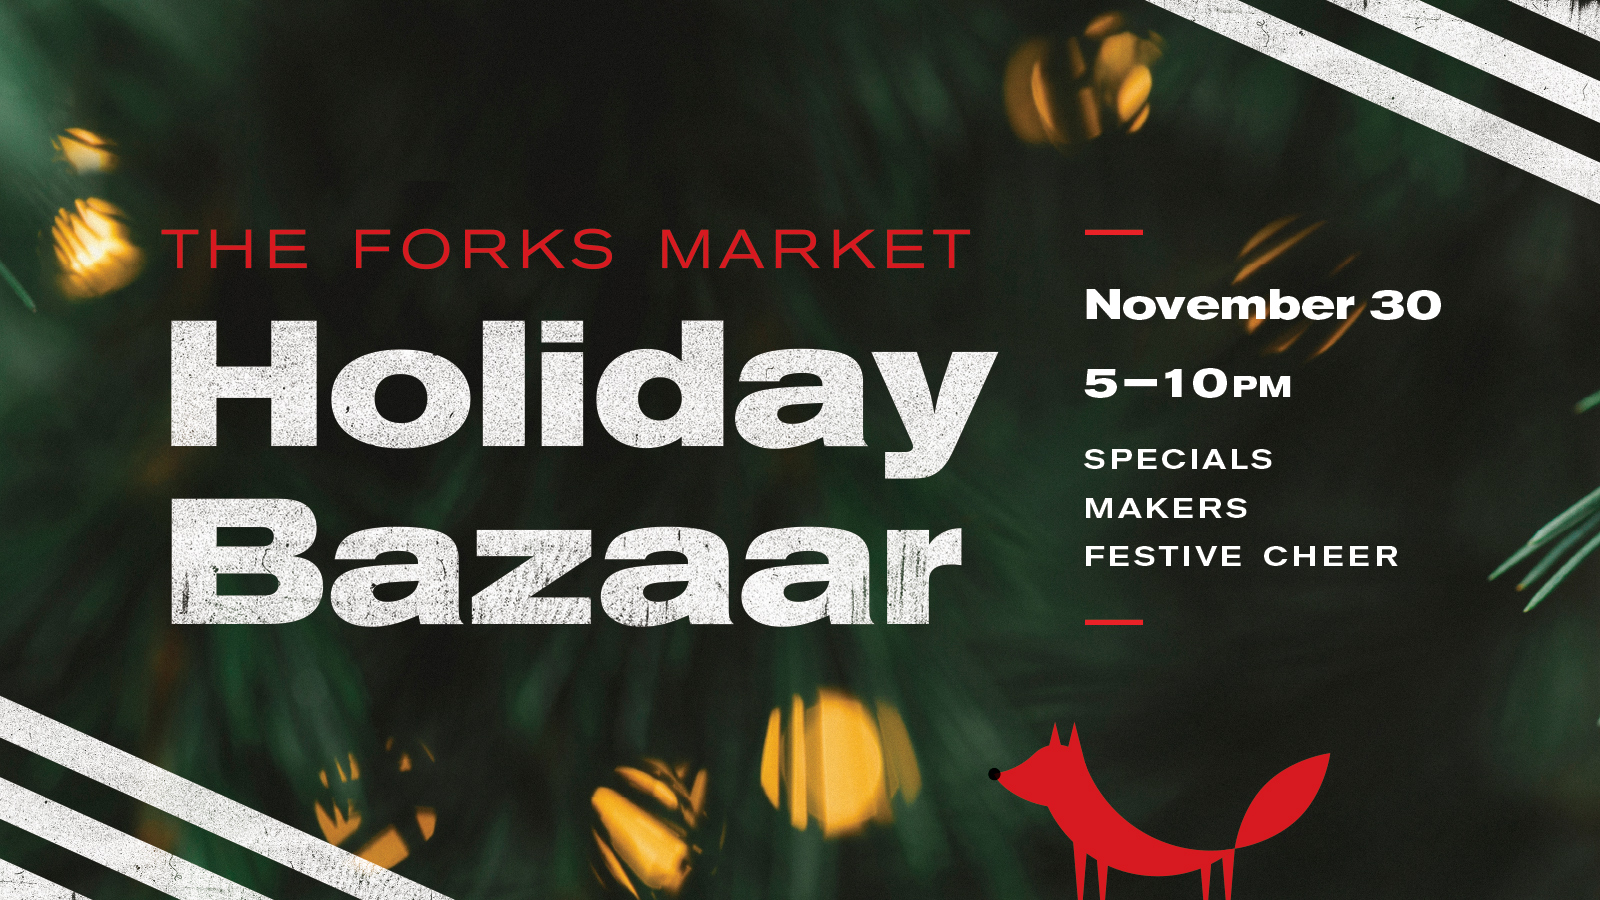 FOR-Holiday-bazaar-800x450-web-graphic_FIN.jpg (814 KB)